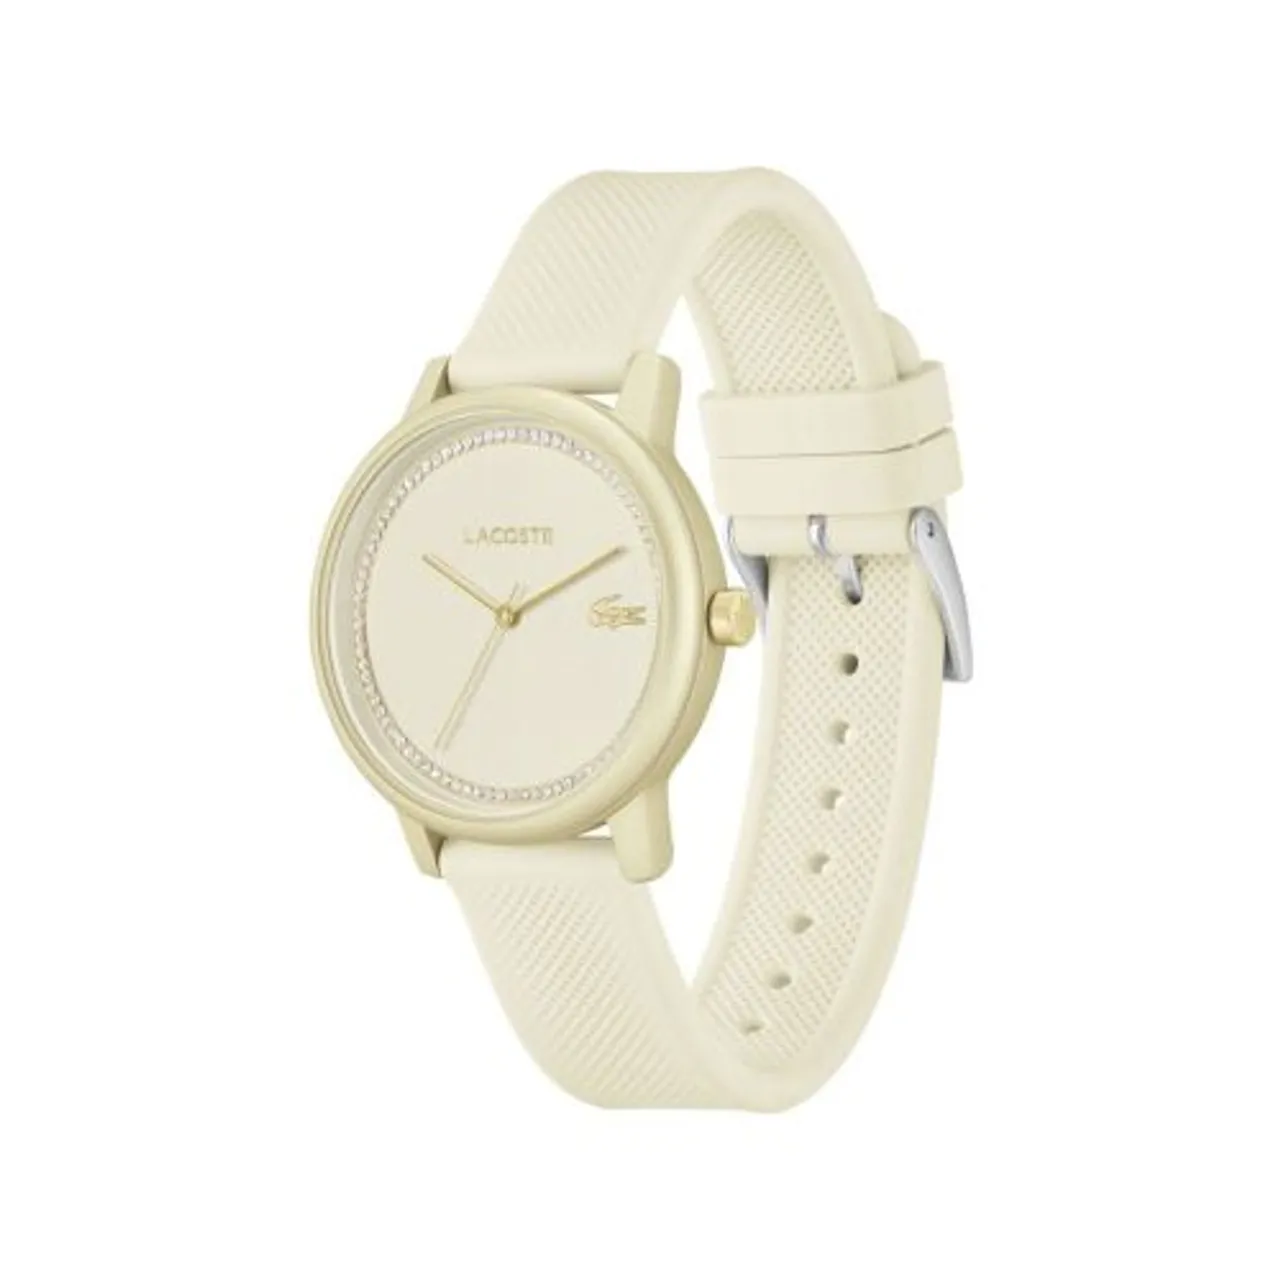 Lacoste Womens Champagne 12.12 Go Watch